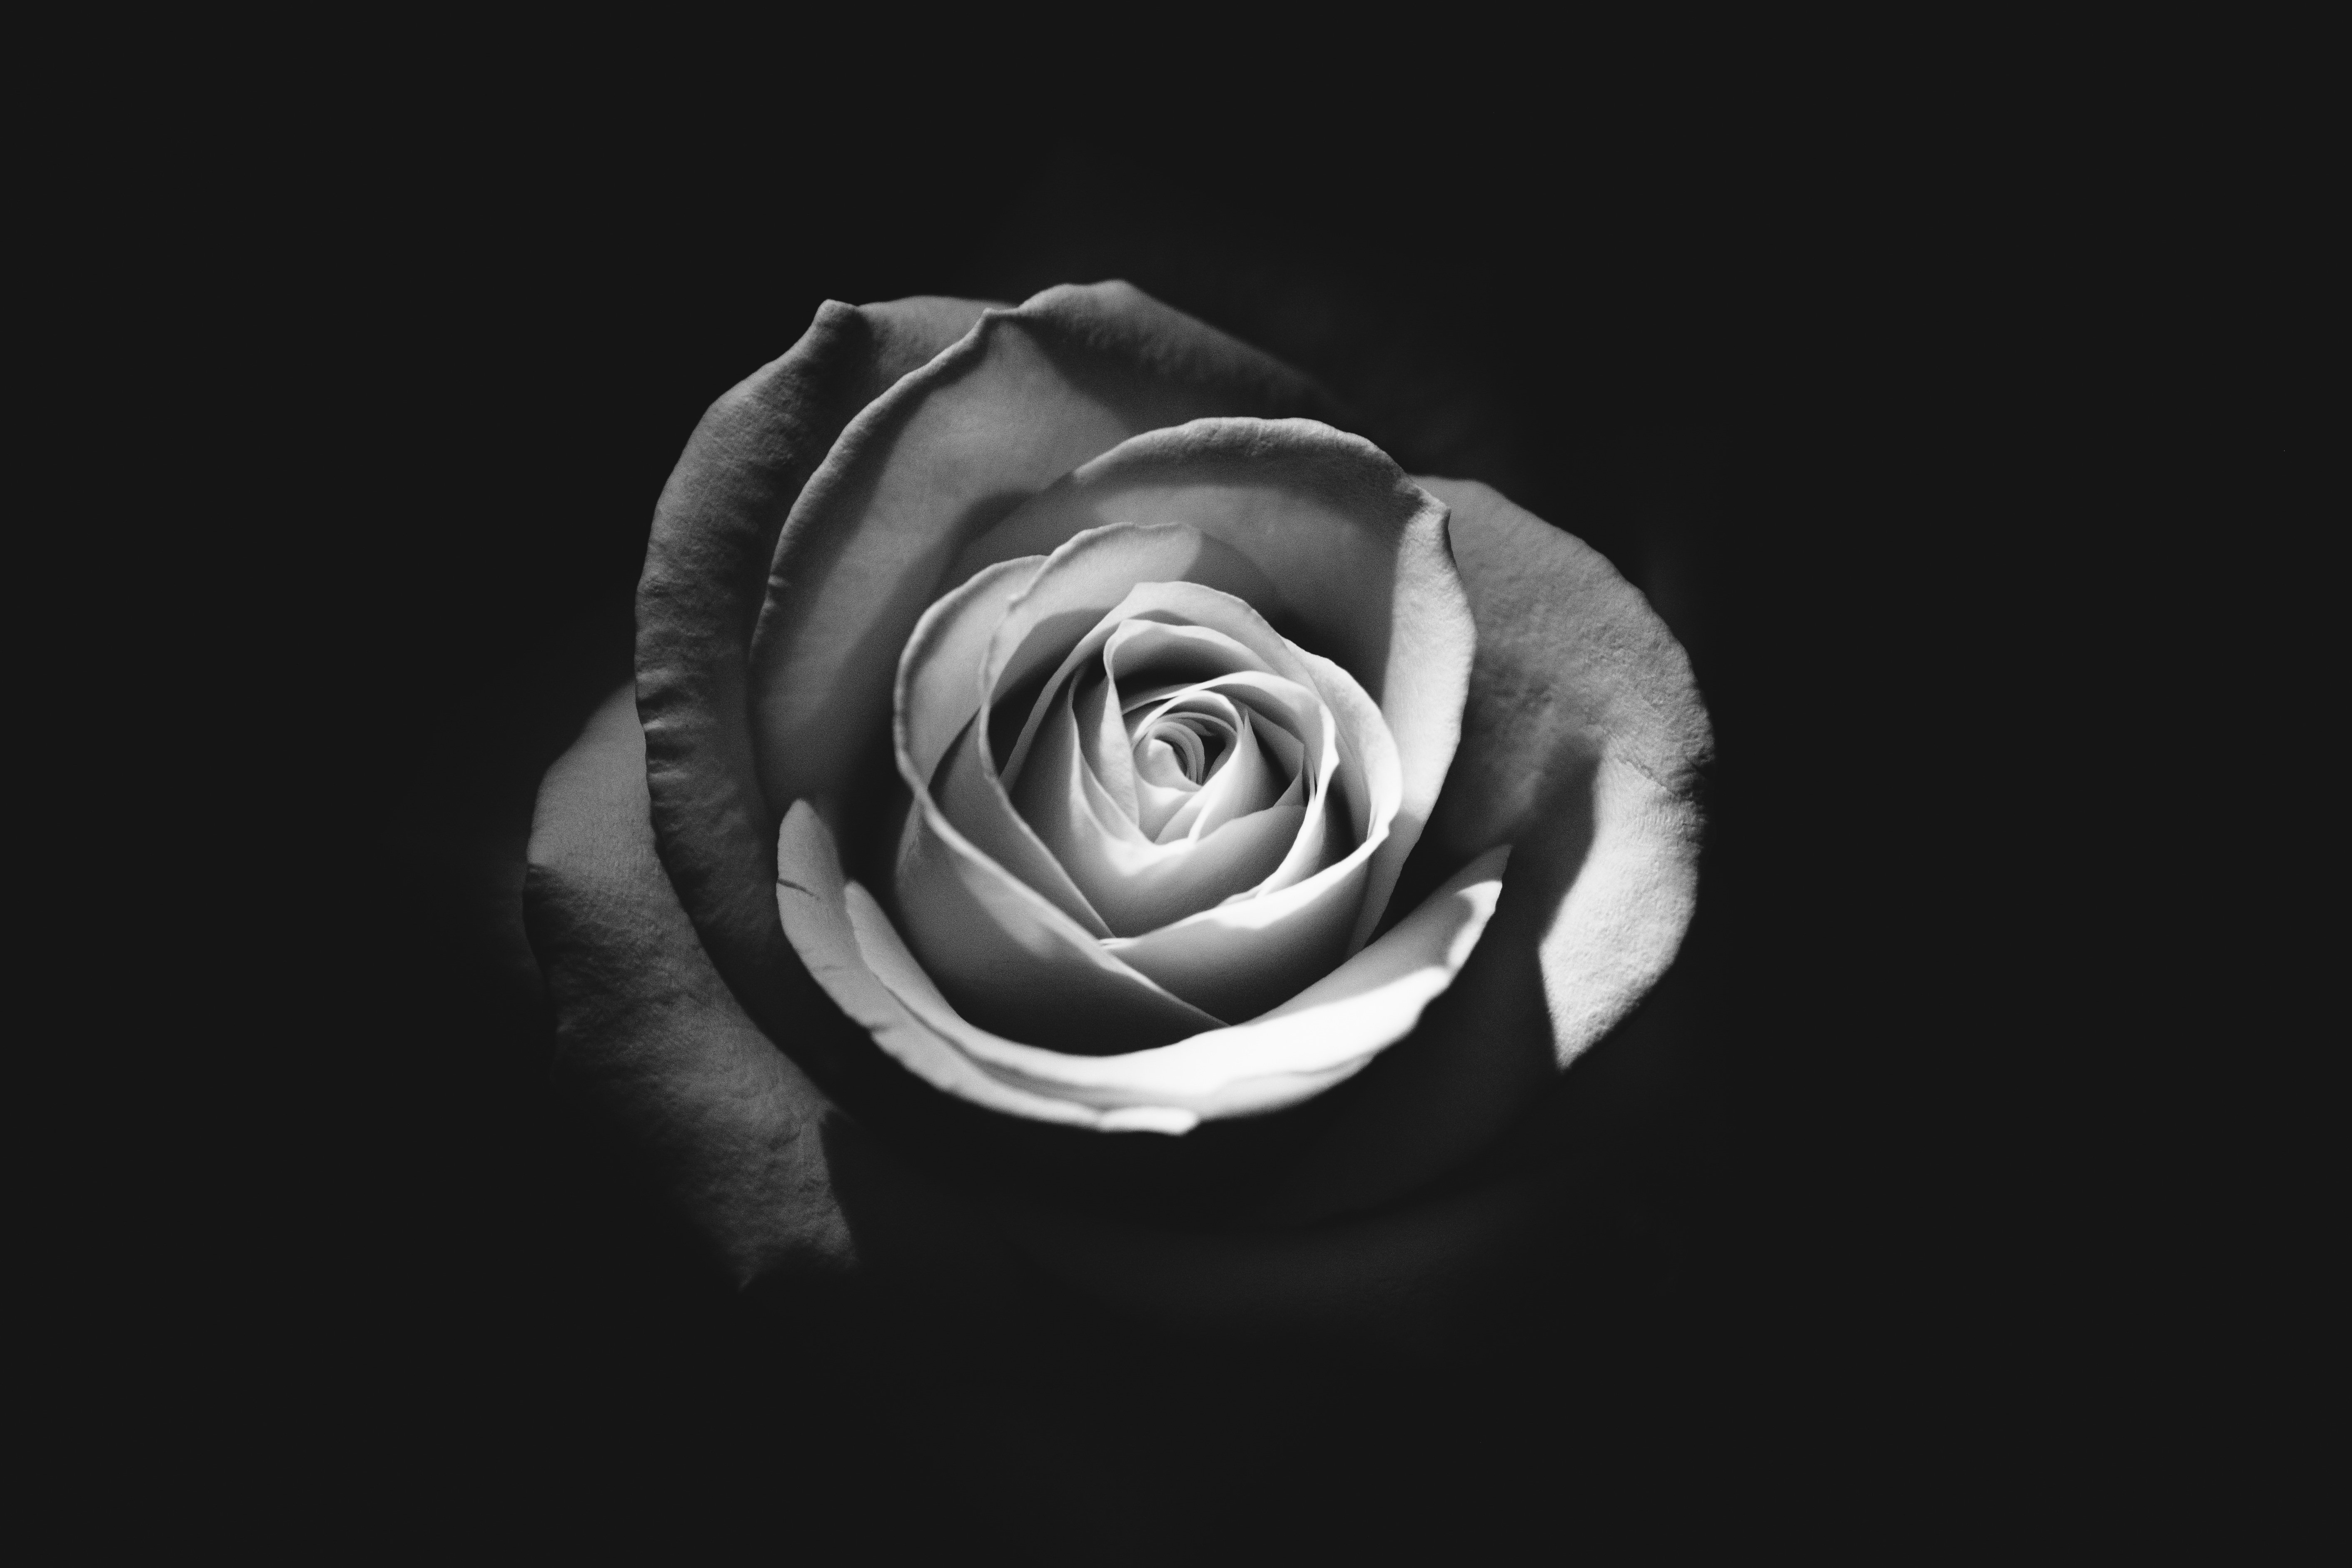 Free photo The rose in the black and white photo